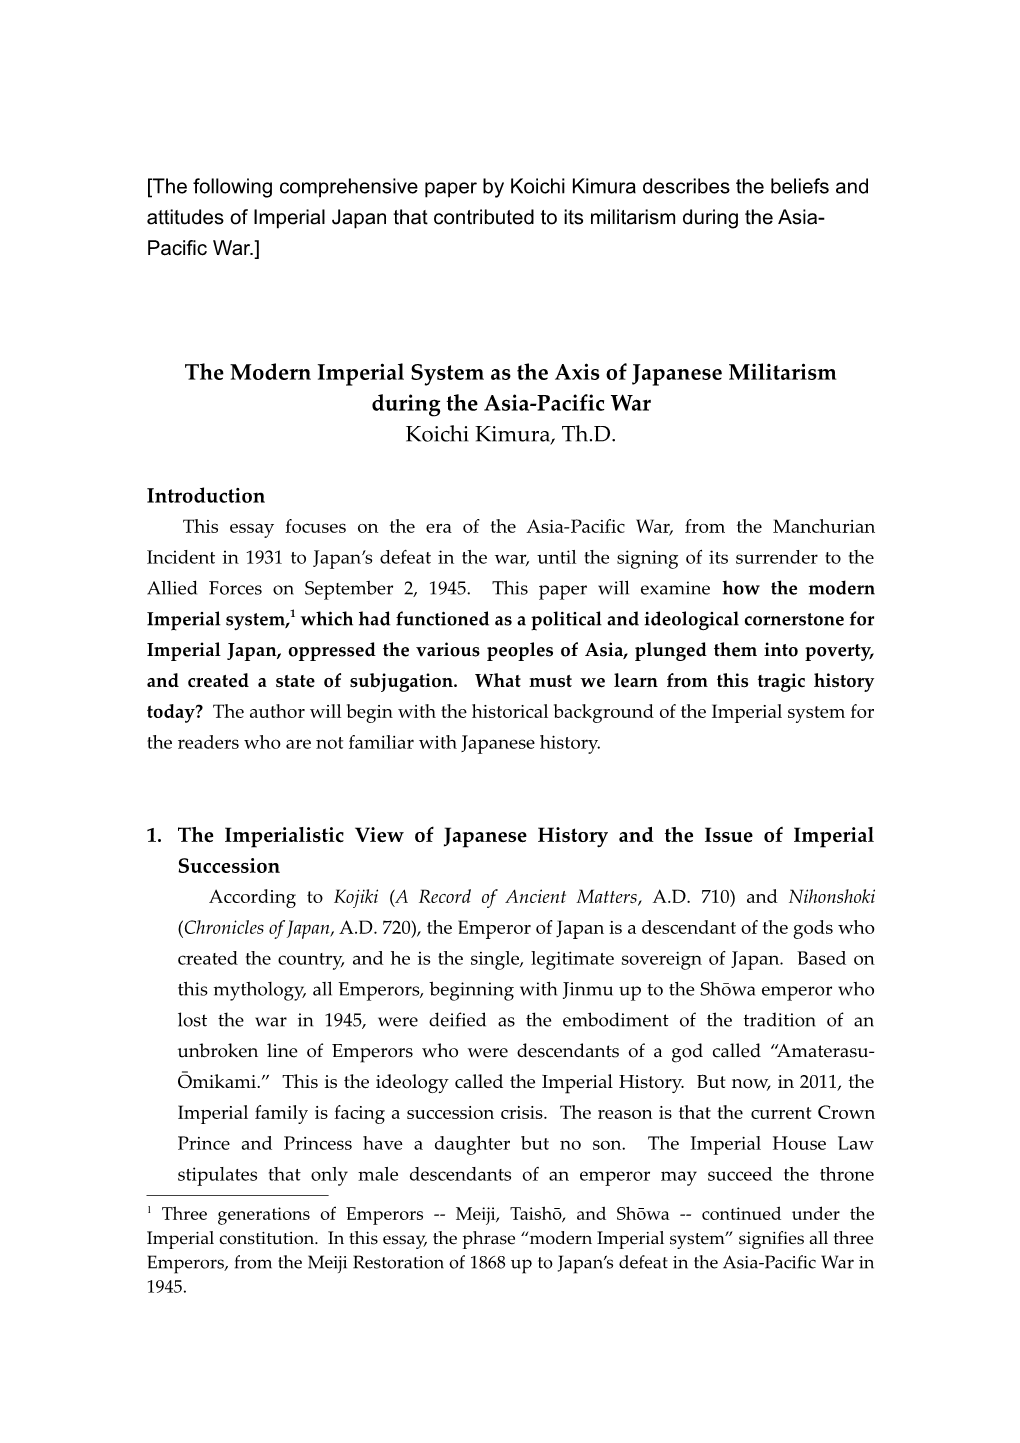 The Modern Imperial System As the Axis of Japanese Militarism